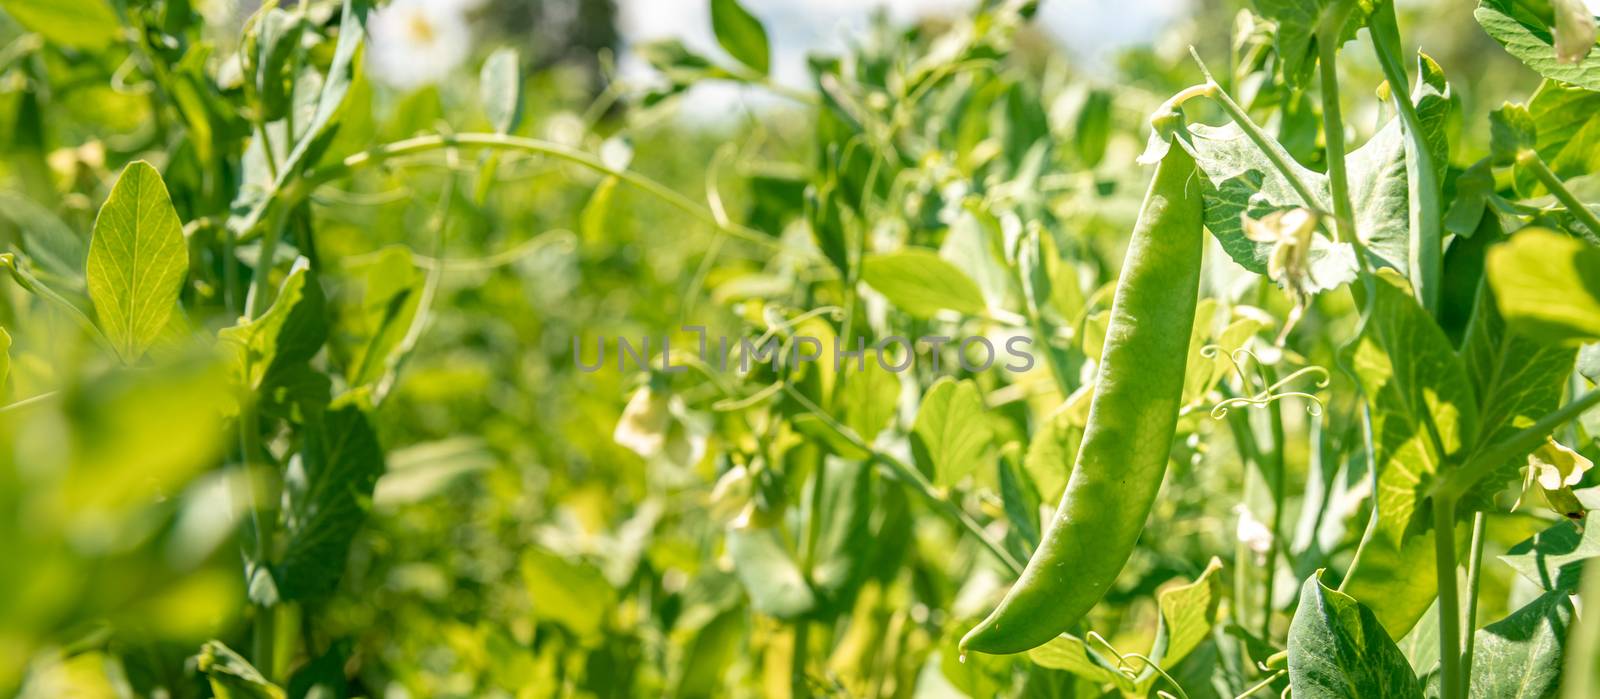 growing green sugar peas in organic quality without pesticide on the farm by Edophoto